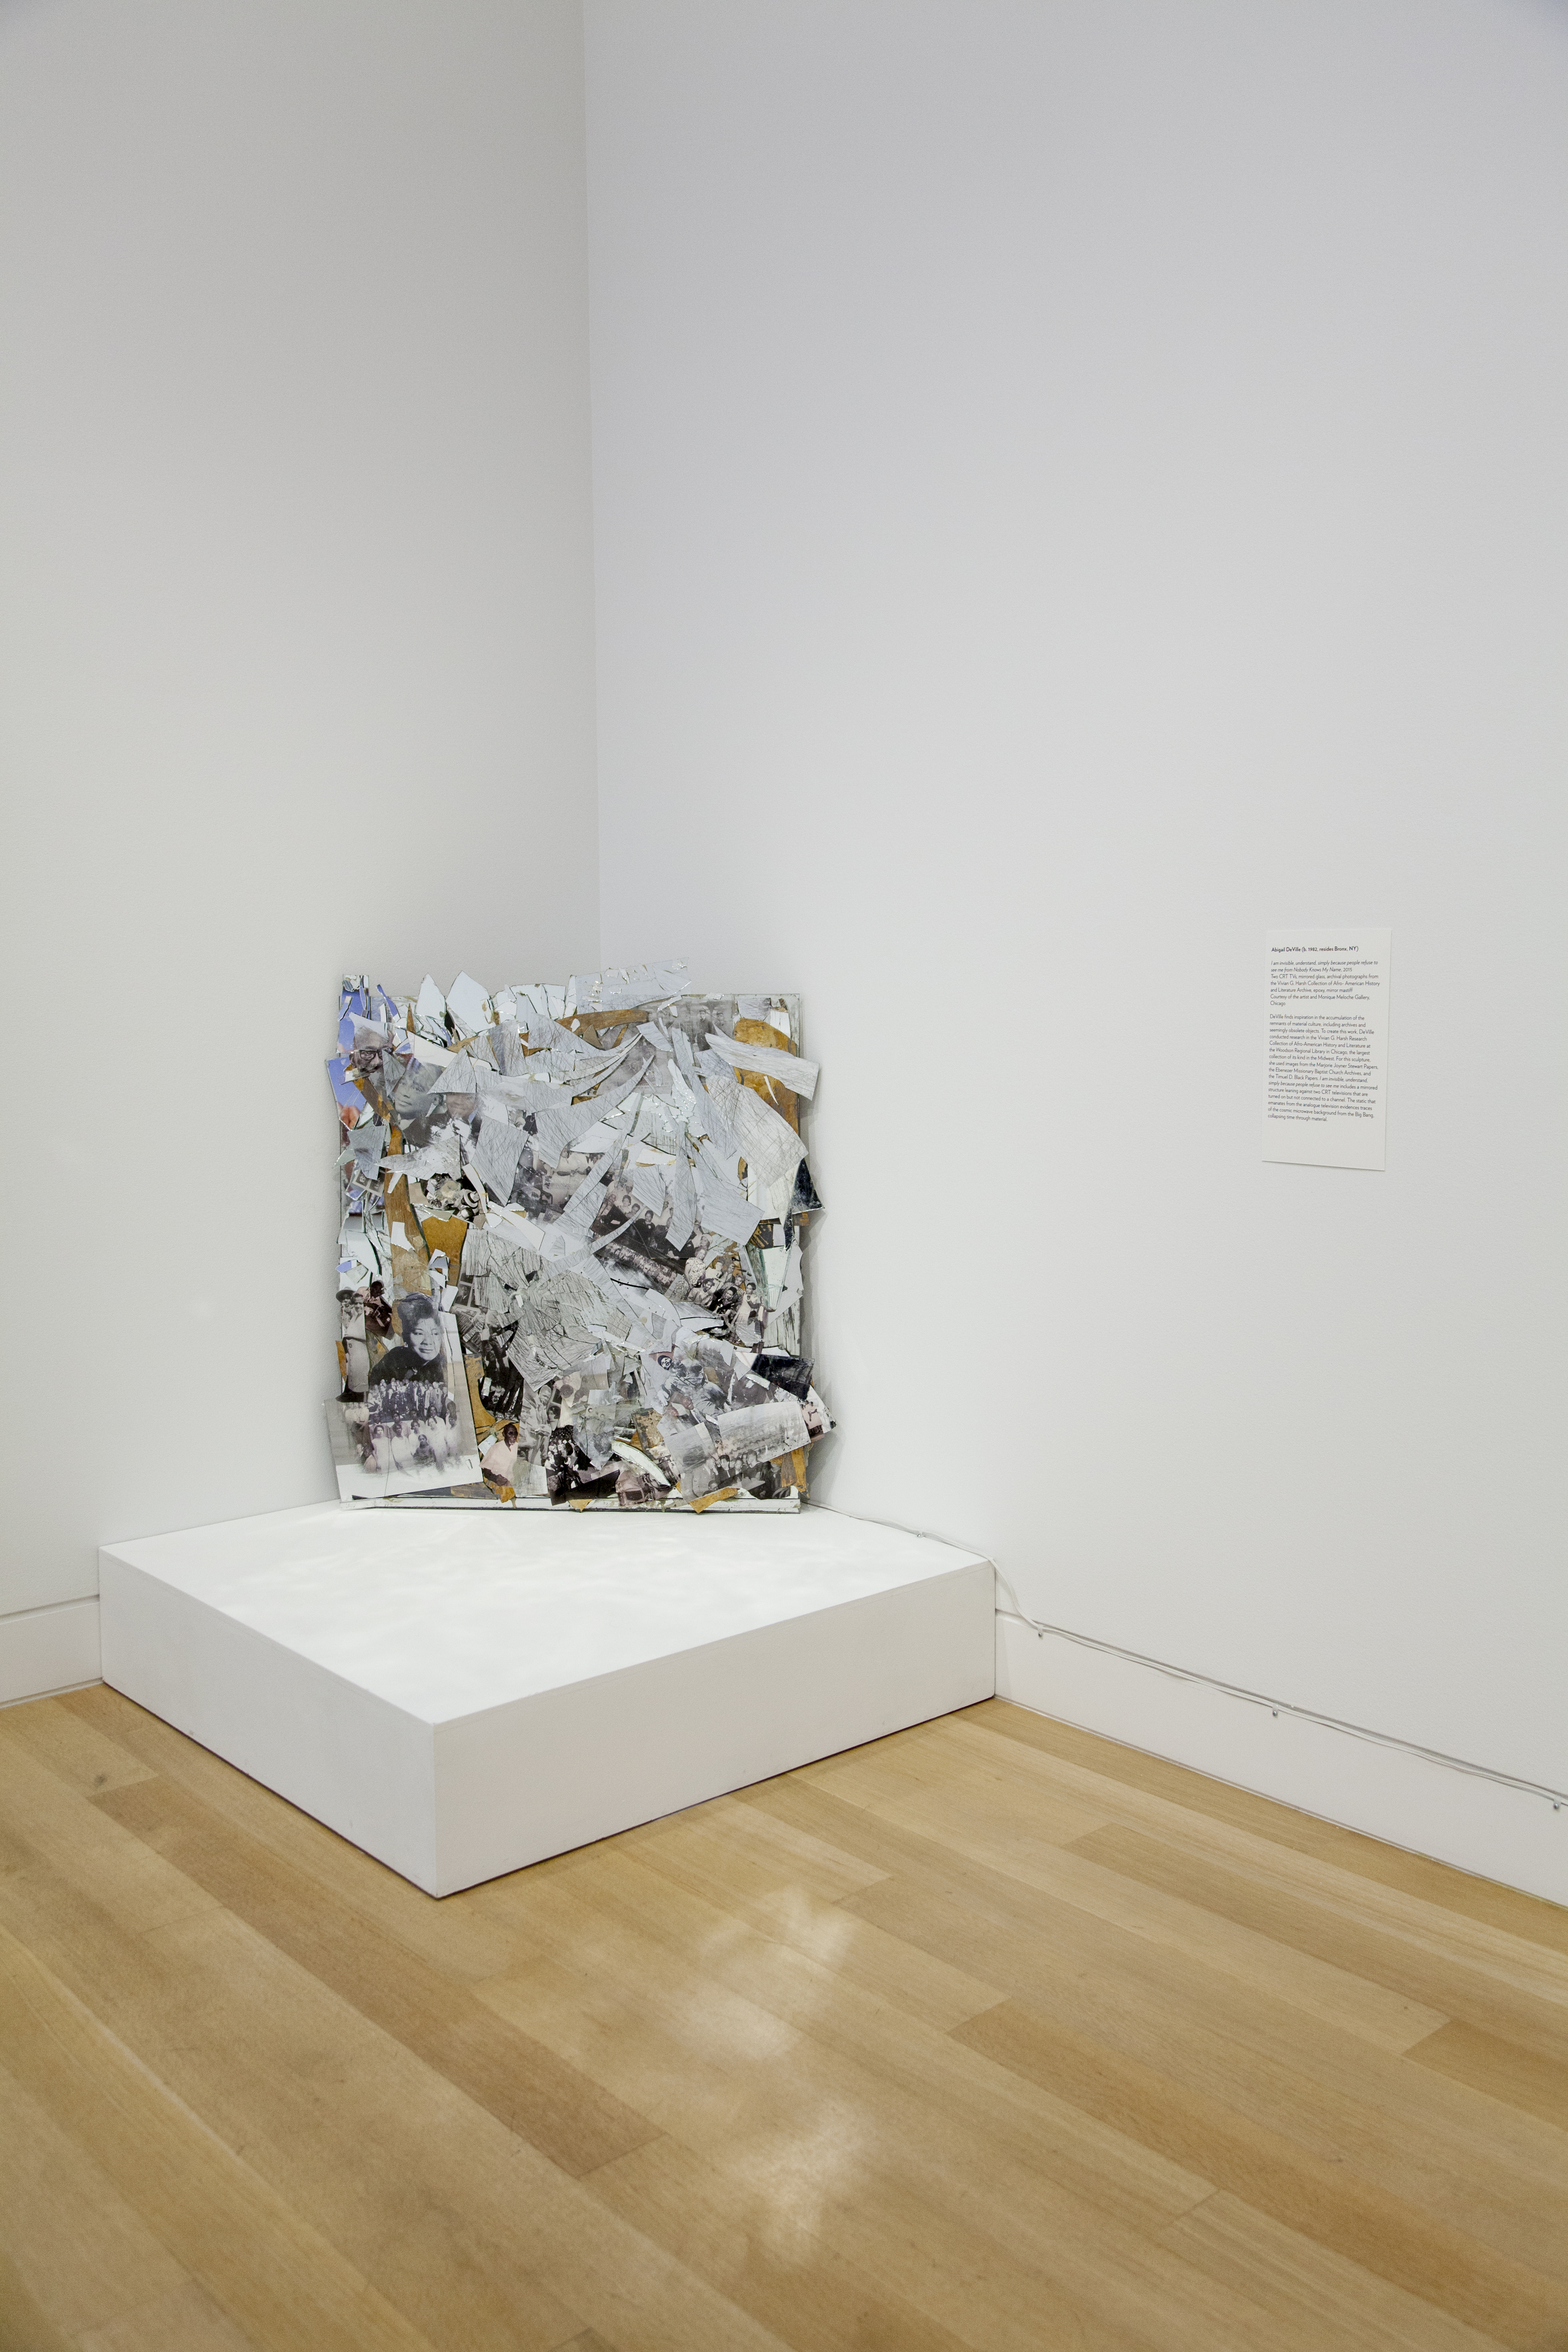 Image: Abigail DeVille, I am invisible, understand, simply because people refuse to see me from Nobody Knows My Name, 2015 [installation view]. A collage of shattered glass and imagery covers a gutted television leaning against the corner of a room. Image courtesy of DePaul Art Museum.